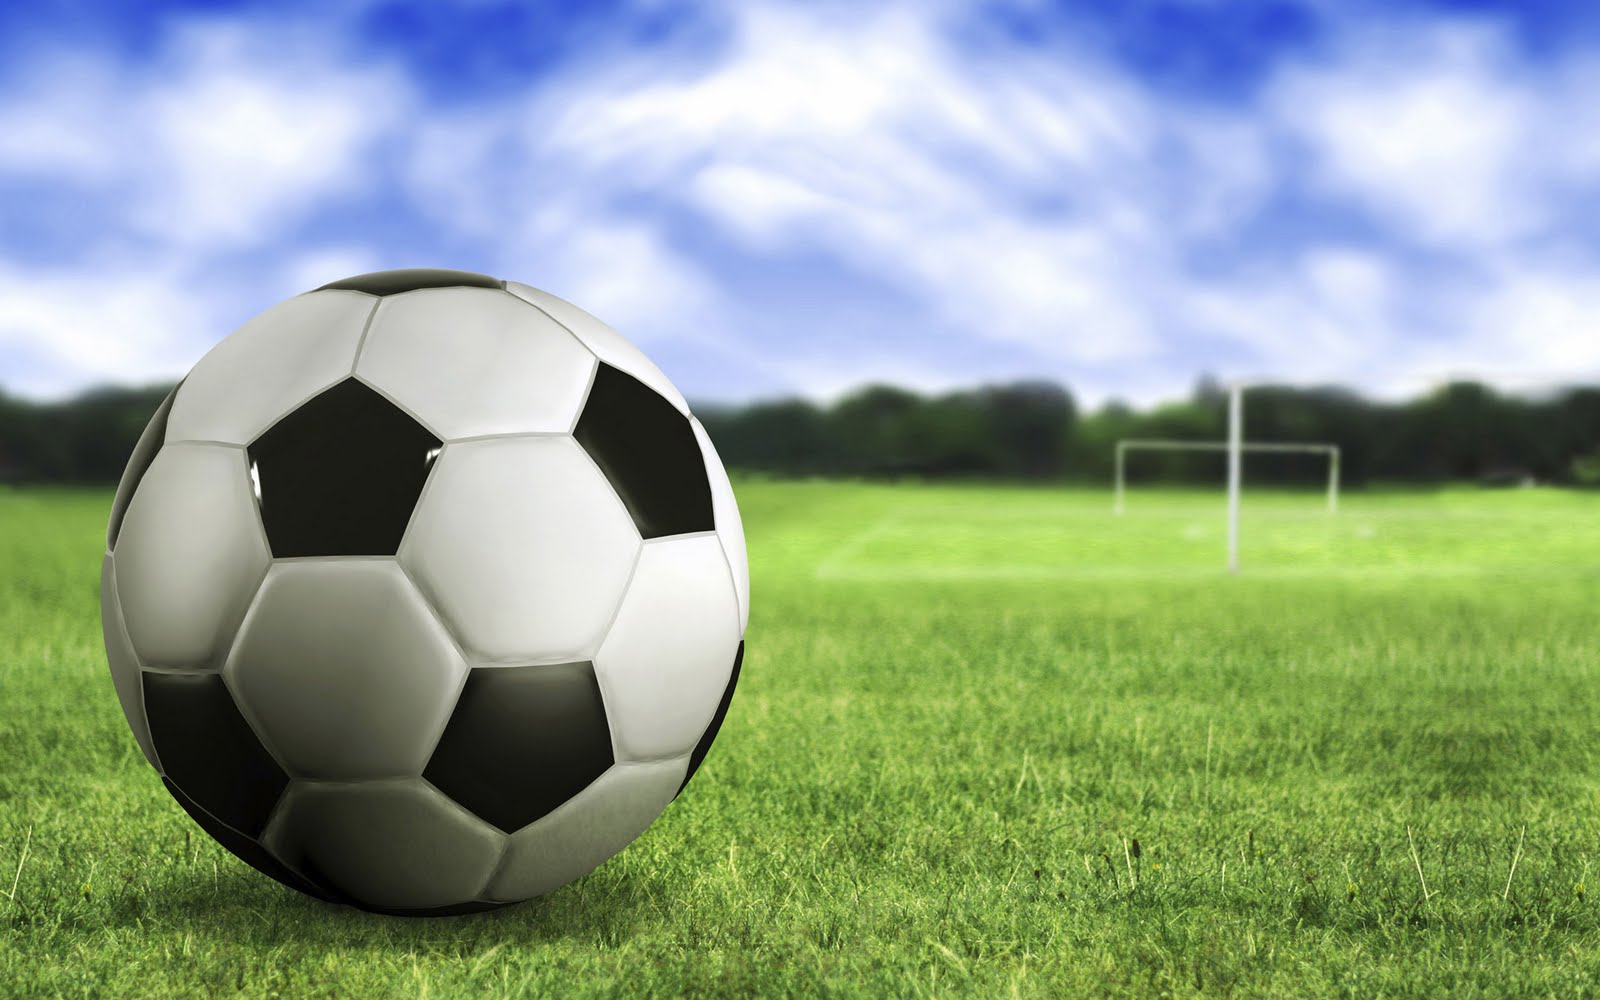 Soccer Football Wallpapers   Free Soccer Football Wallpapers